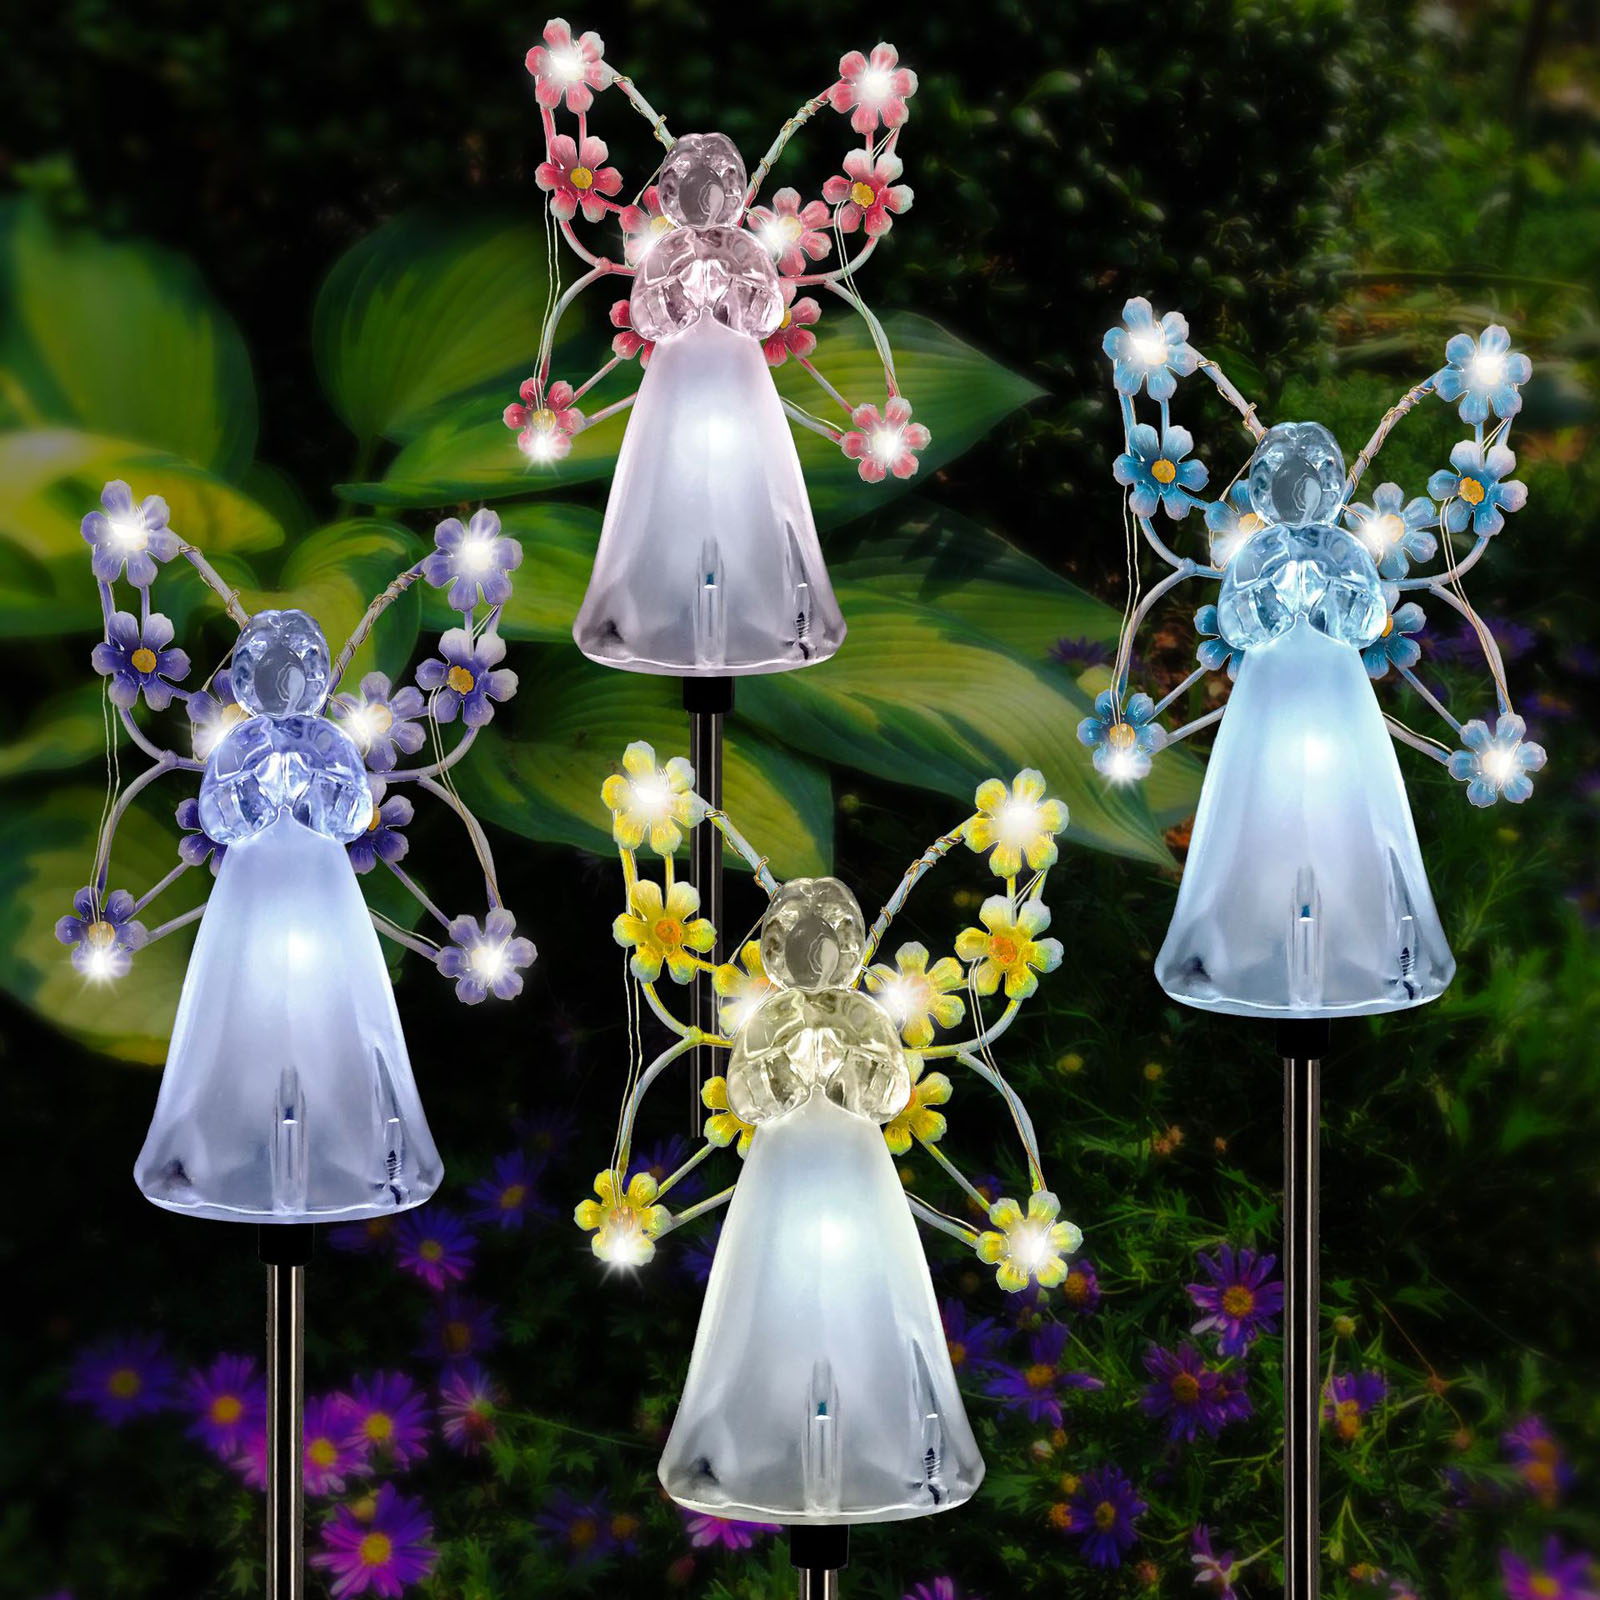 Solar Angel Garden Stake Lights, Angel lamp Solar Lawn Light Angel Solar Lawn Light Mothers Day Garden Gifts Garden Angel Grave Markers for Cemetery Garden Decoration Solar Angel Light Yellow - image 3 of 3